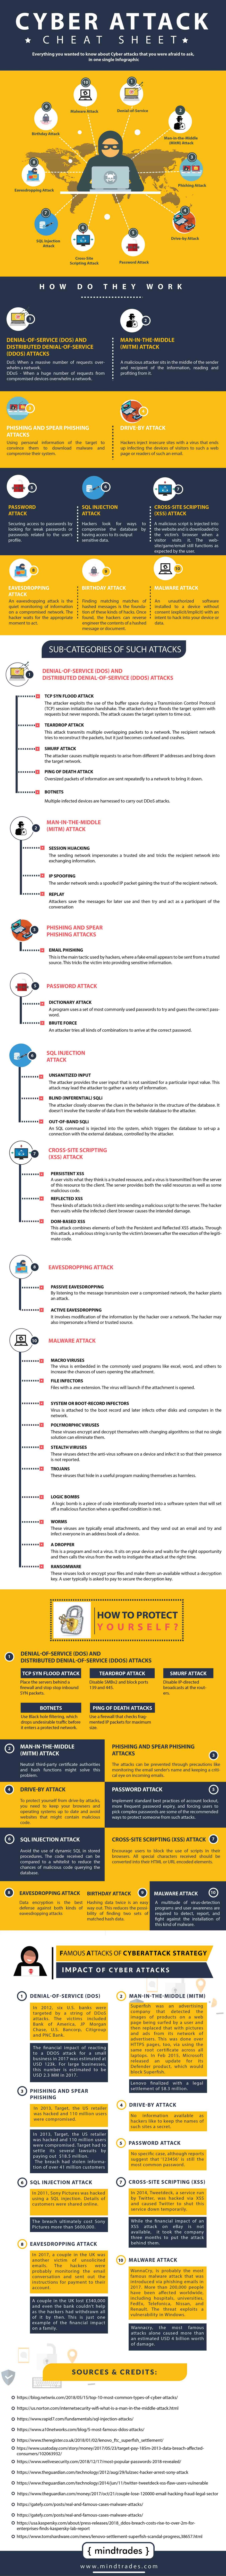 Cyber Attack Cheat Sheet #infographic